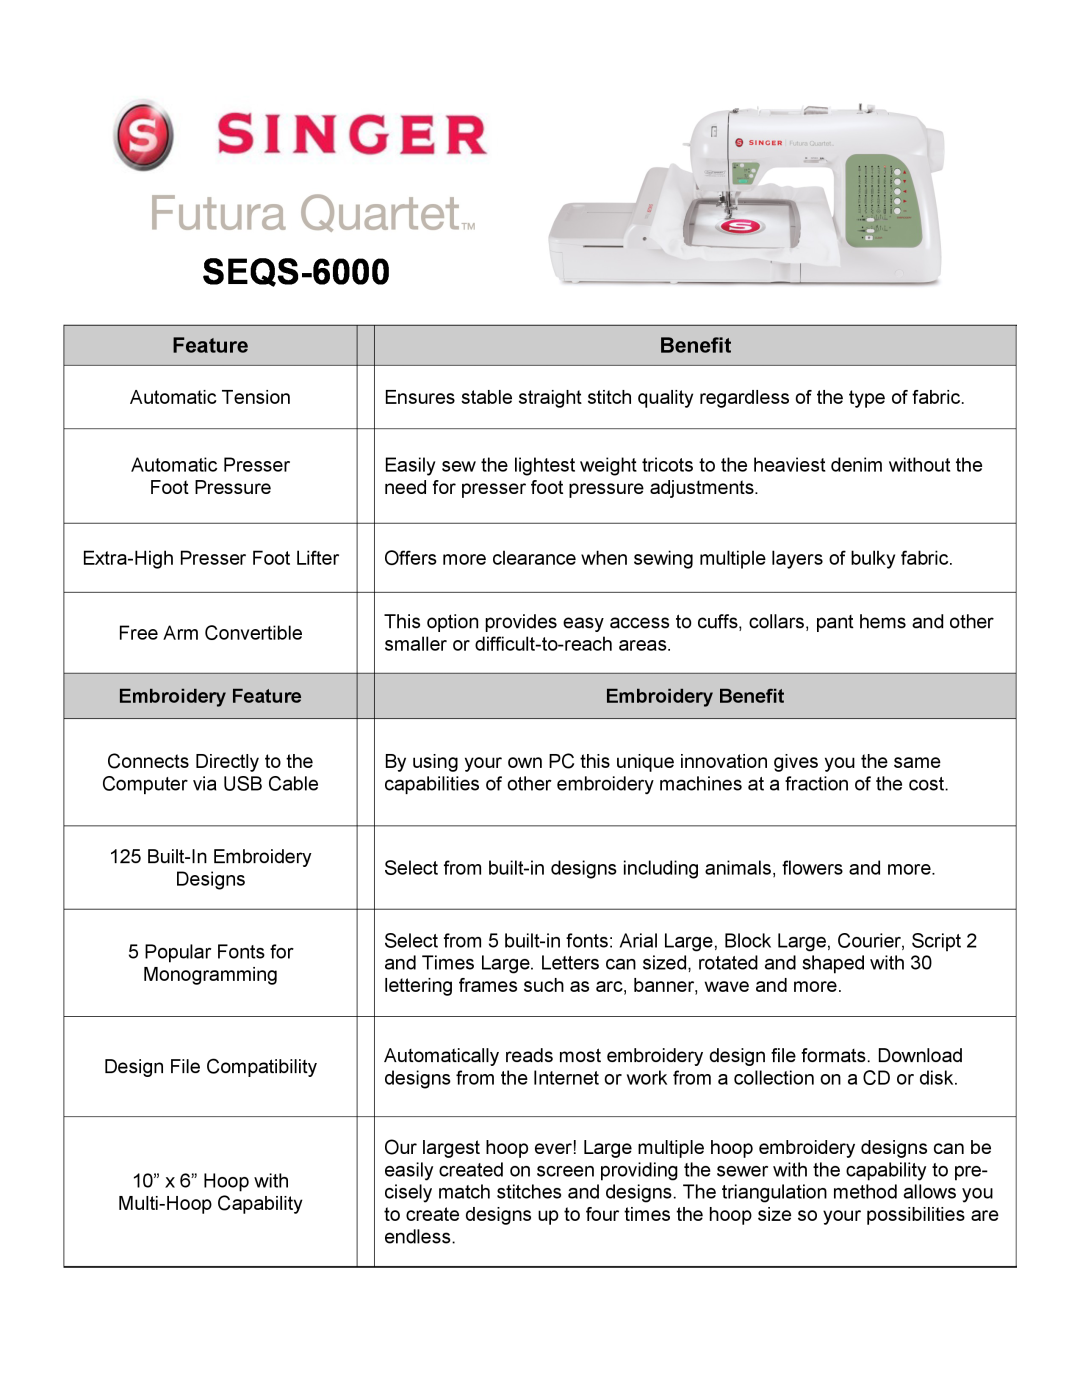 Singer SEQS-6000 manual Feature, Embroidery Benefit 